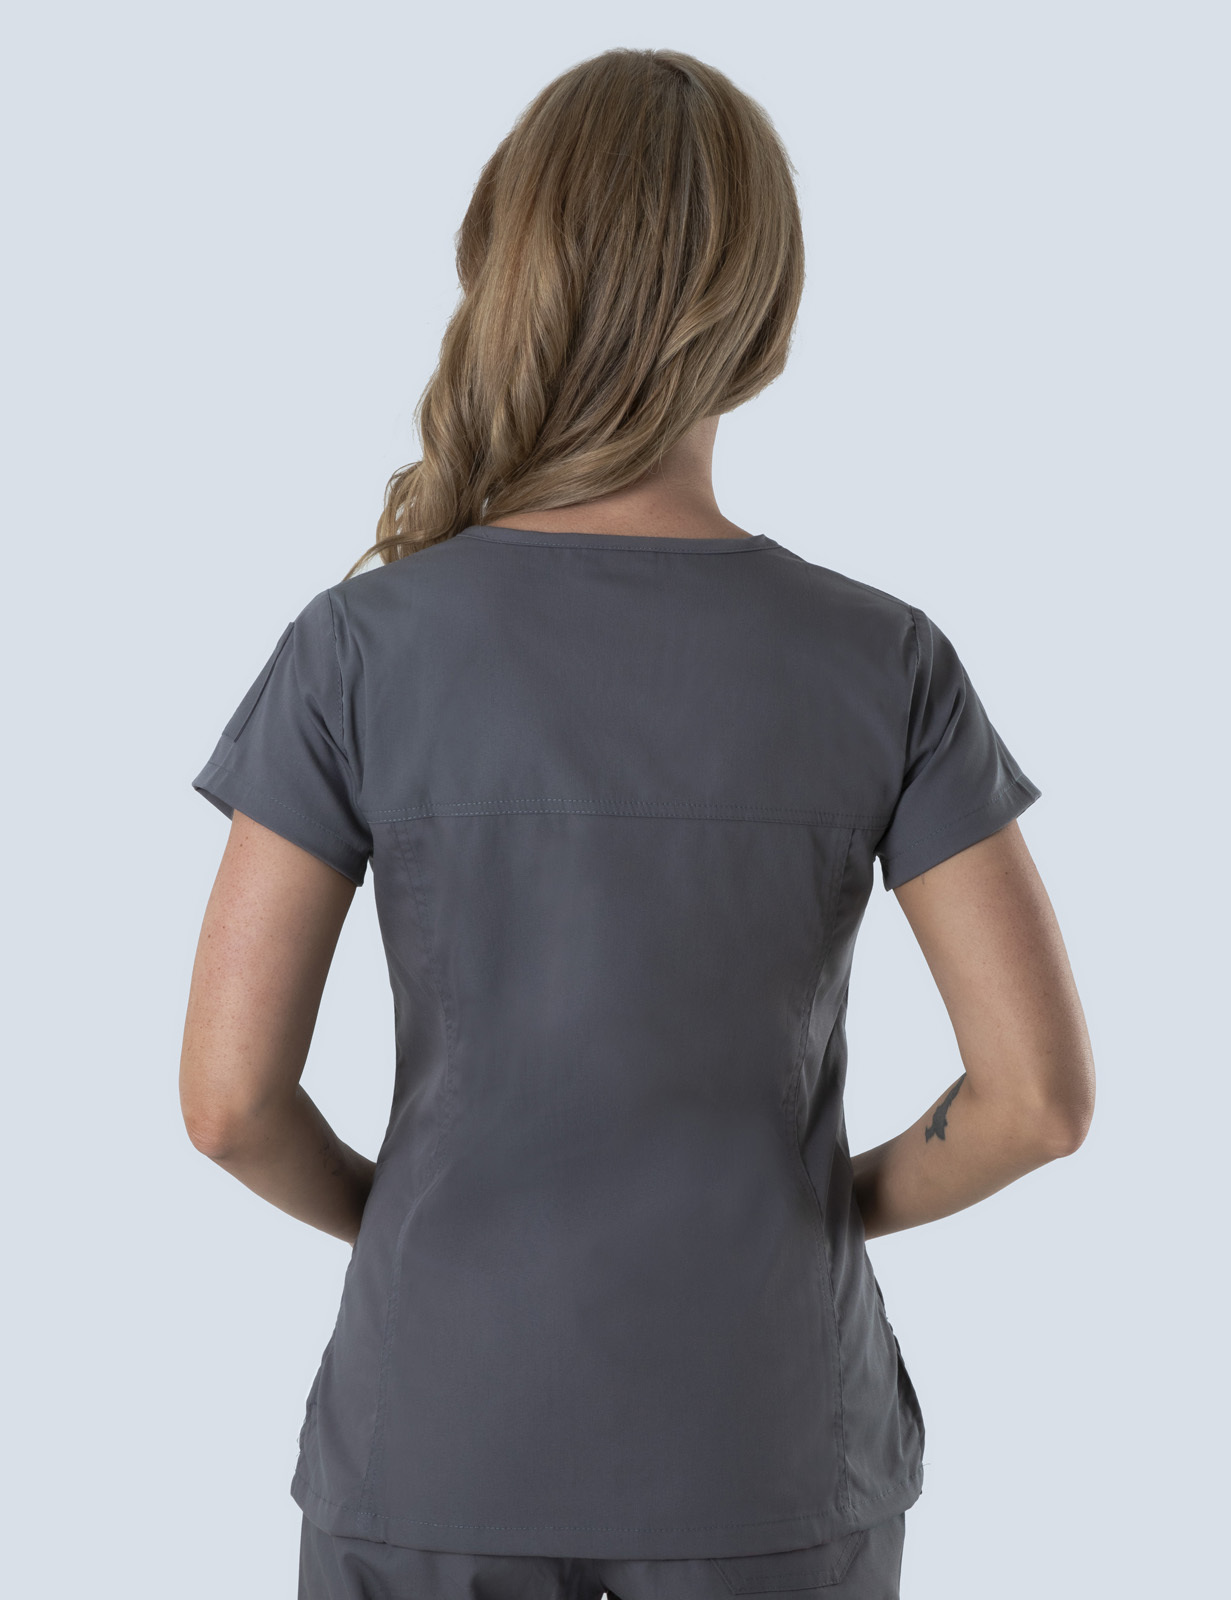 Women's Fit Solid Scrub Top - Steel Grey - 5X Large